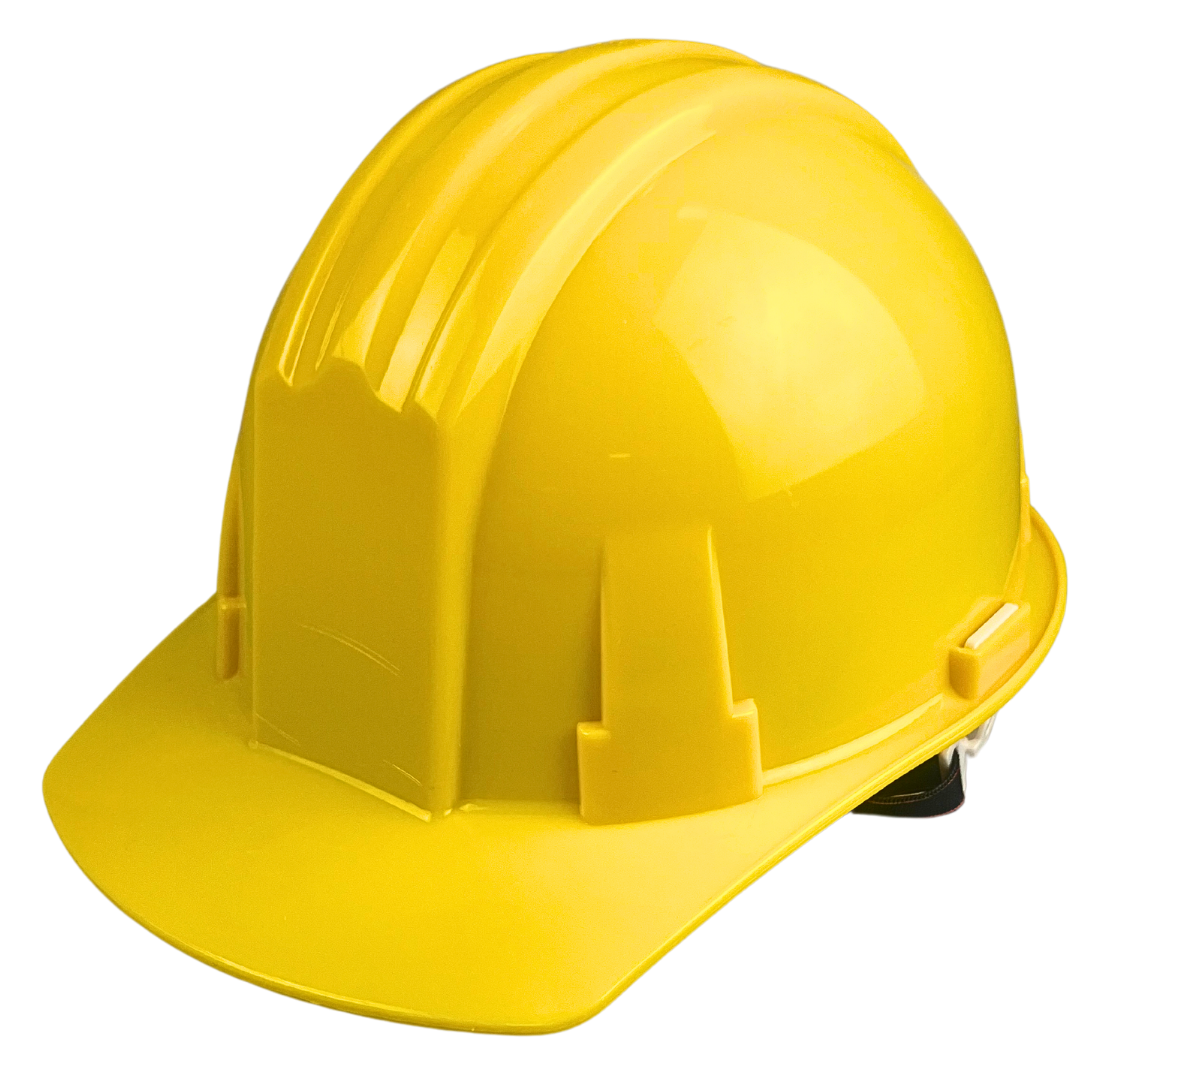 OSHA Approved ABS Adult Size Yellow Safety Hard Hat With Built-In Adjustable Liner  - SF-97704